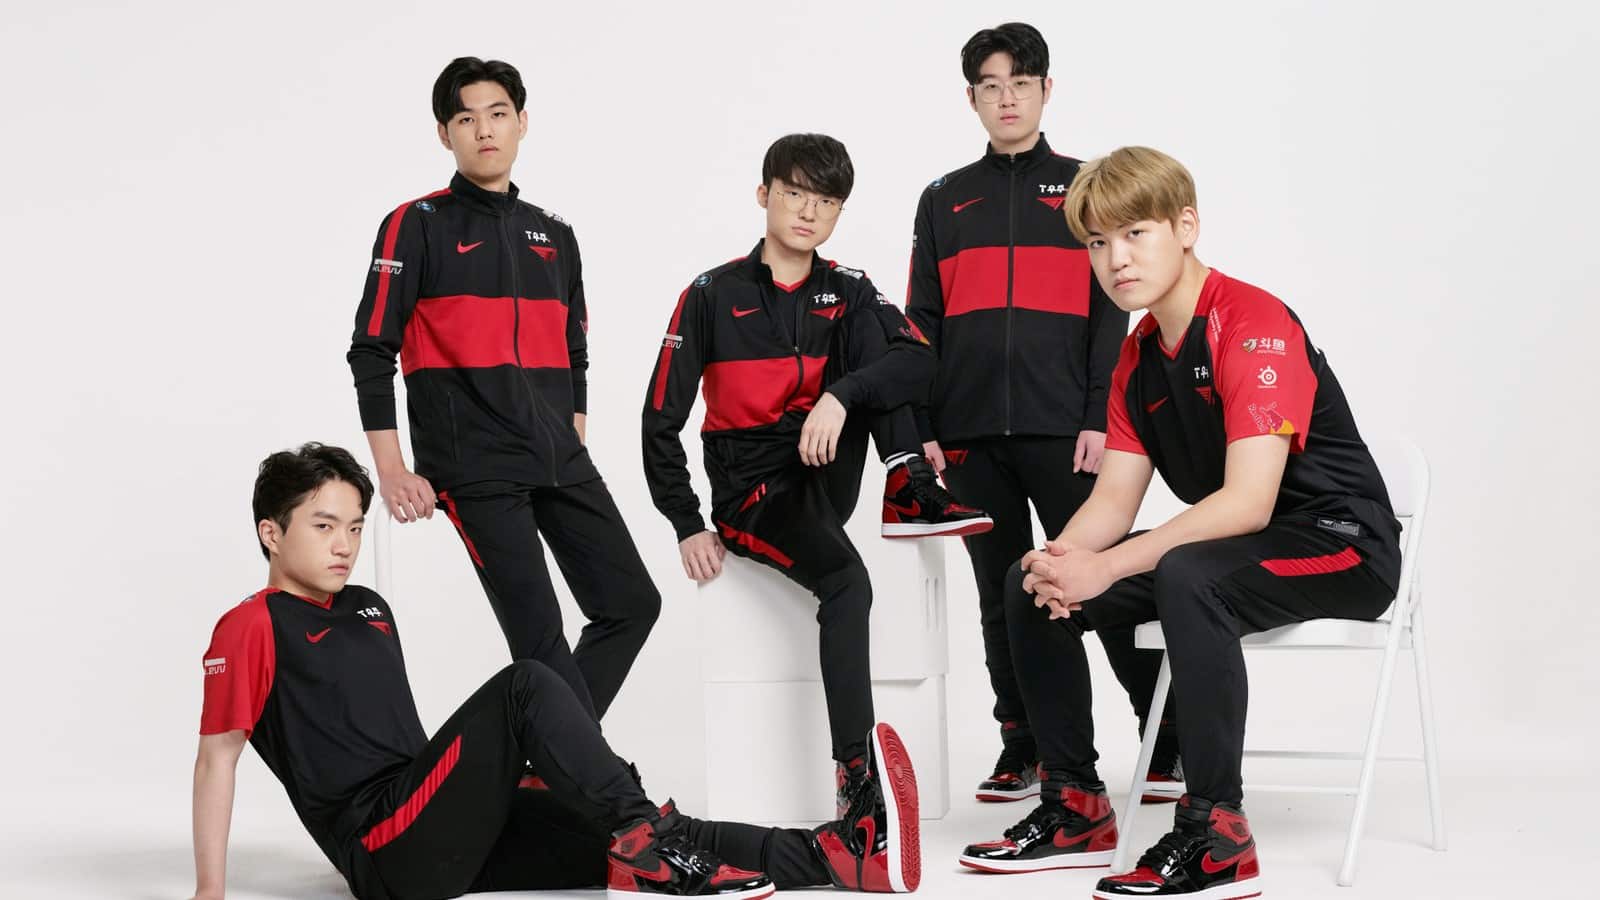 T1's League of Legends team decked out in Nike apparel against a white background